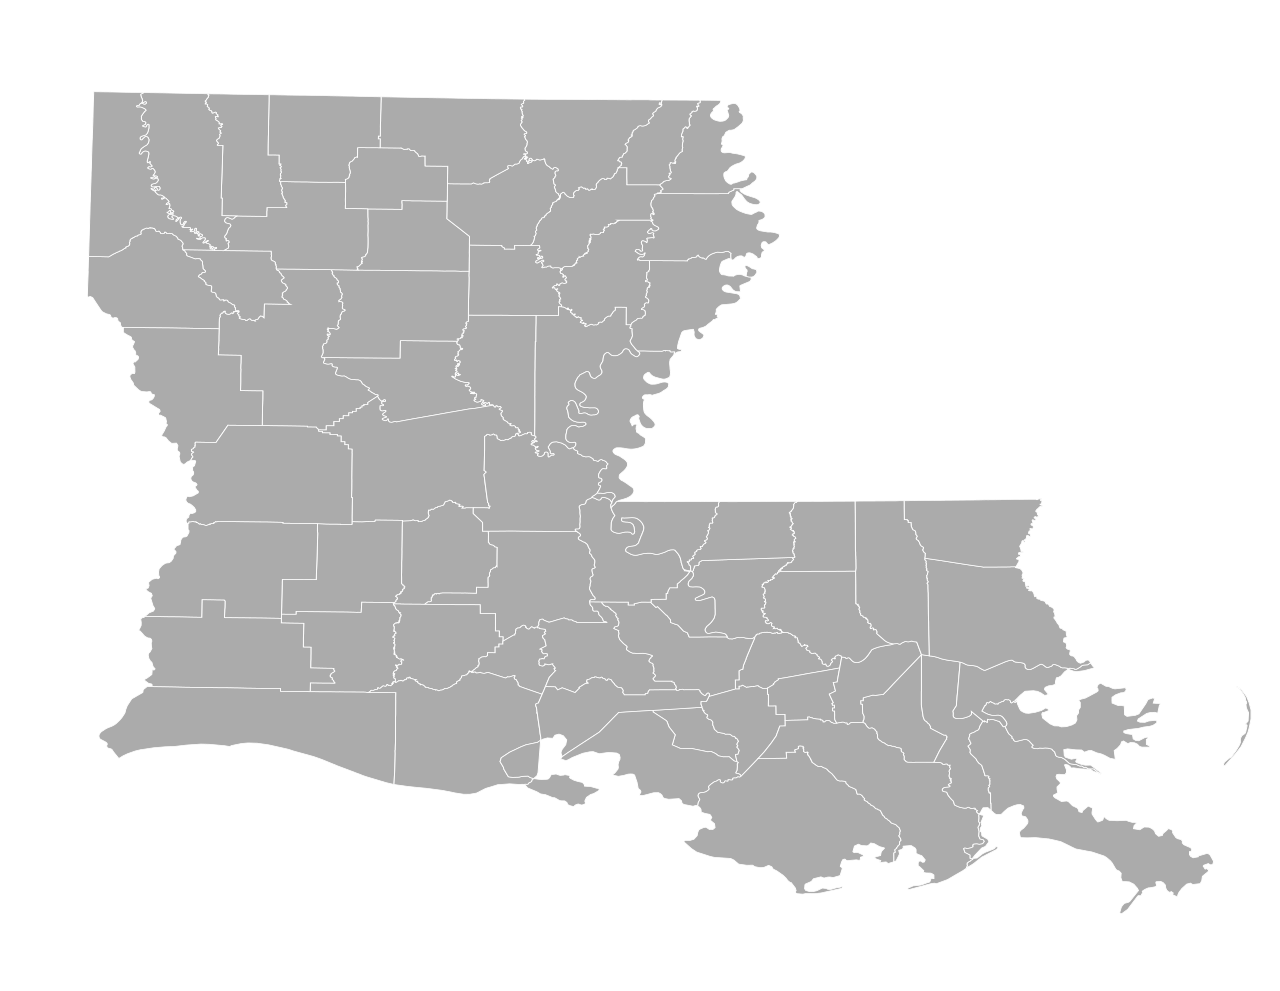 Download File:Louisiana counties.svg - Wikimedia Commons